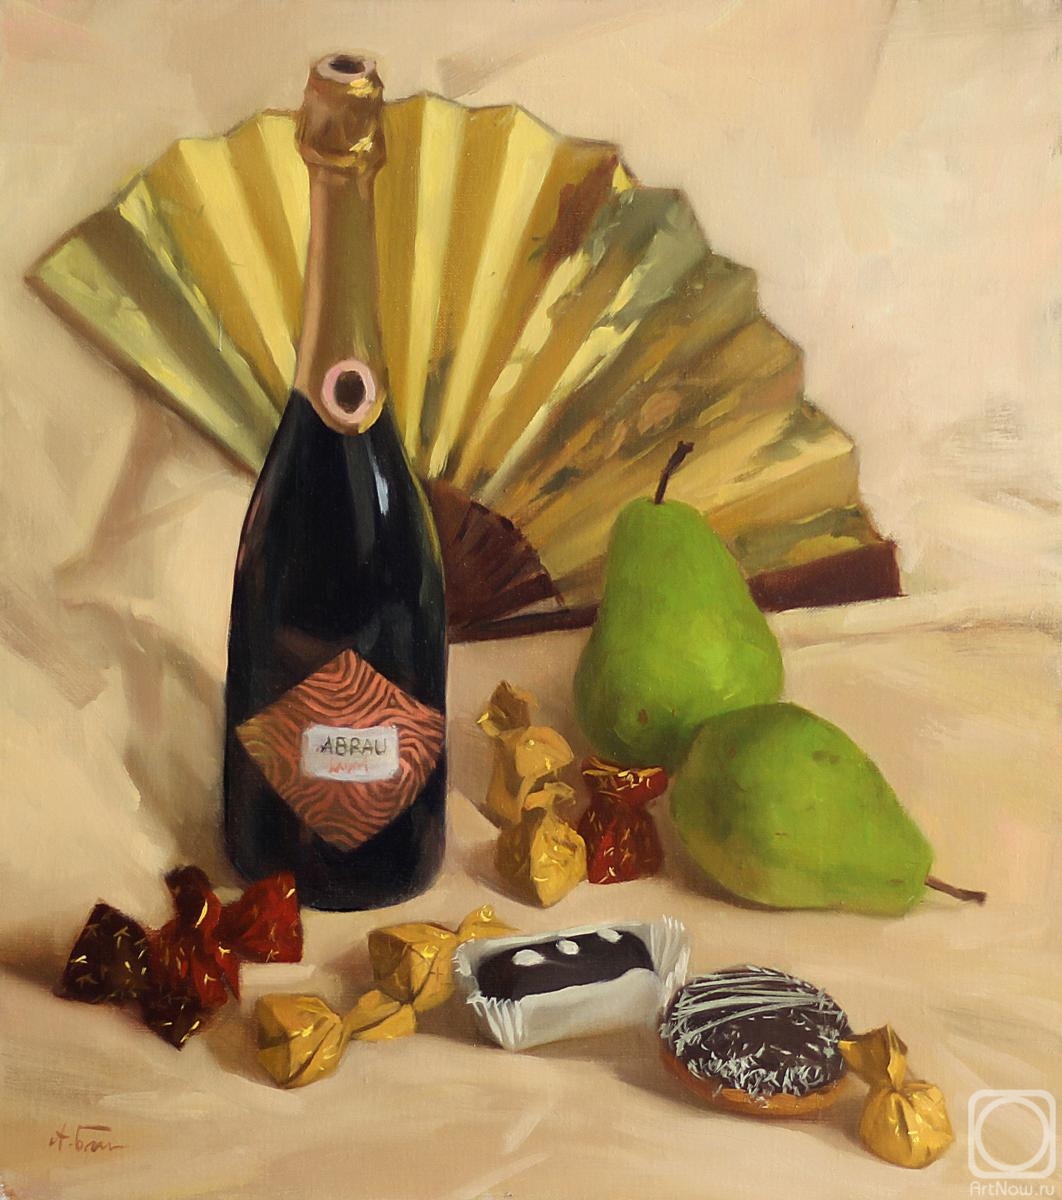 Balychev Andrey. Champagne and sweets